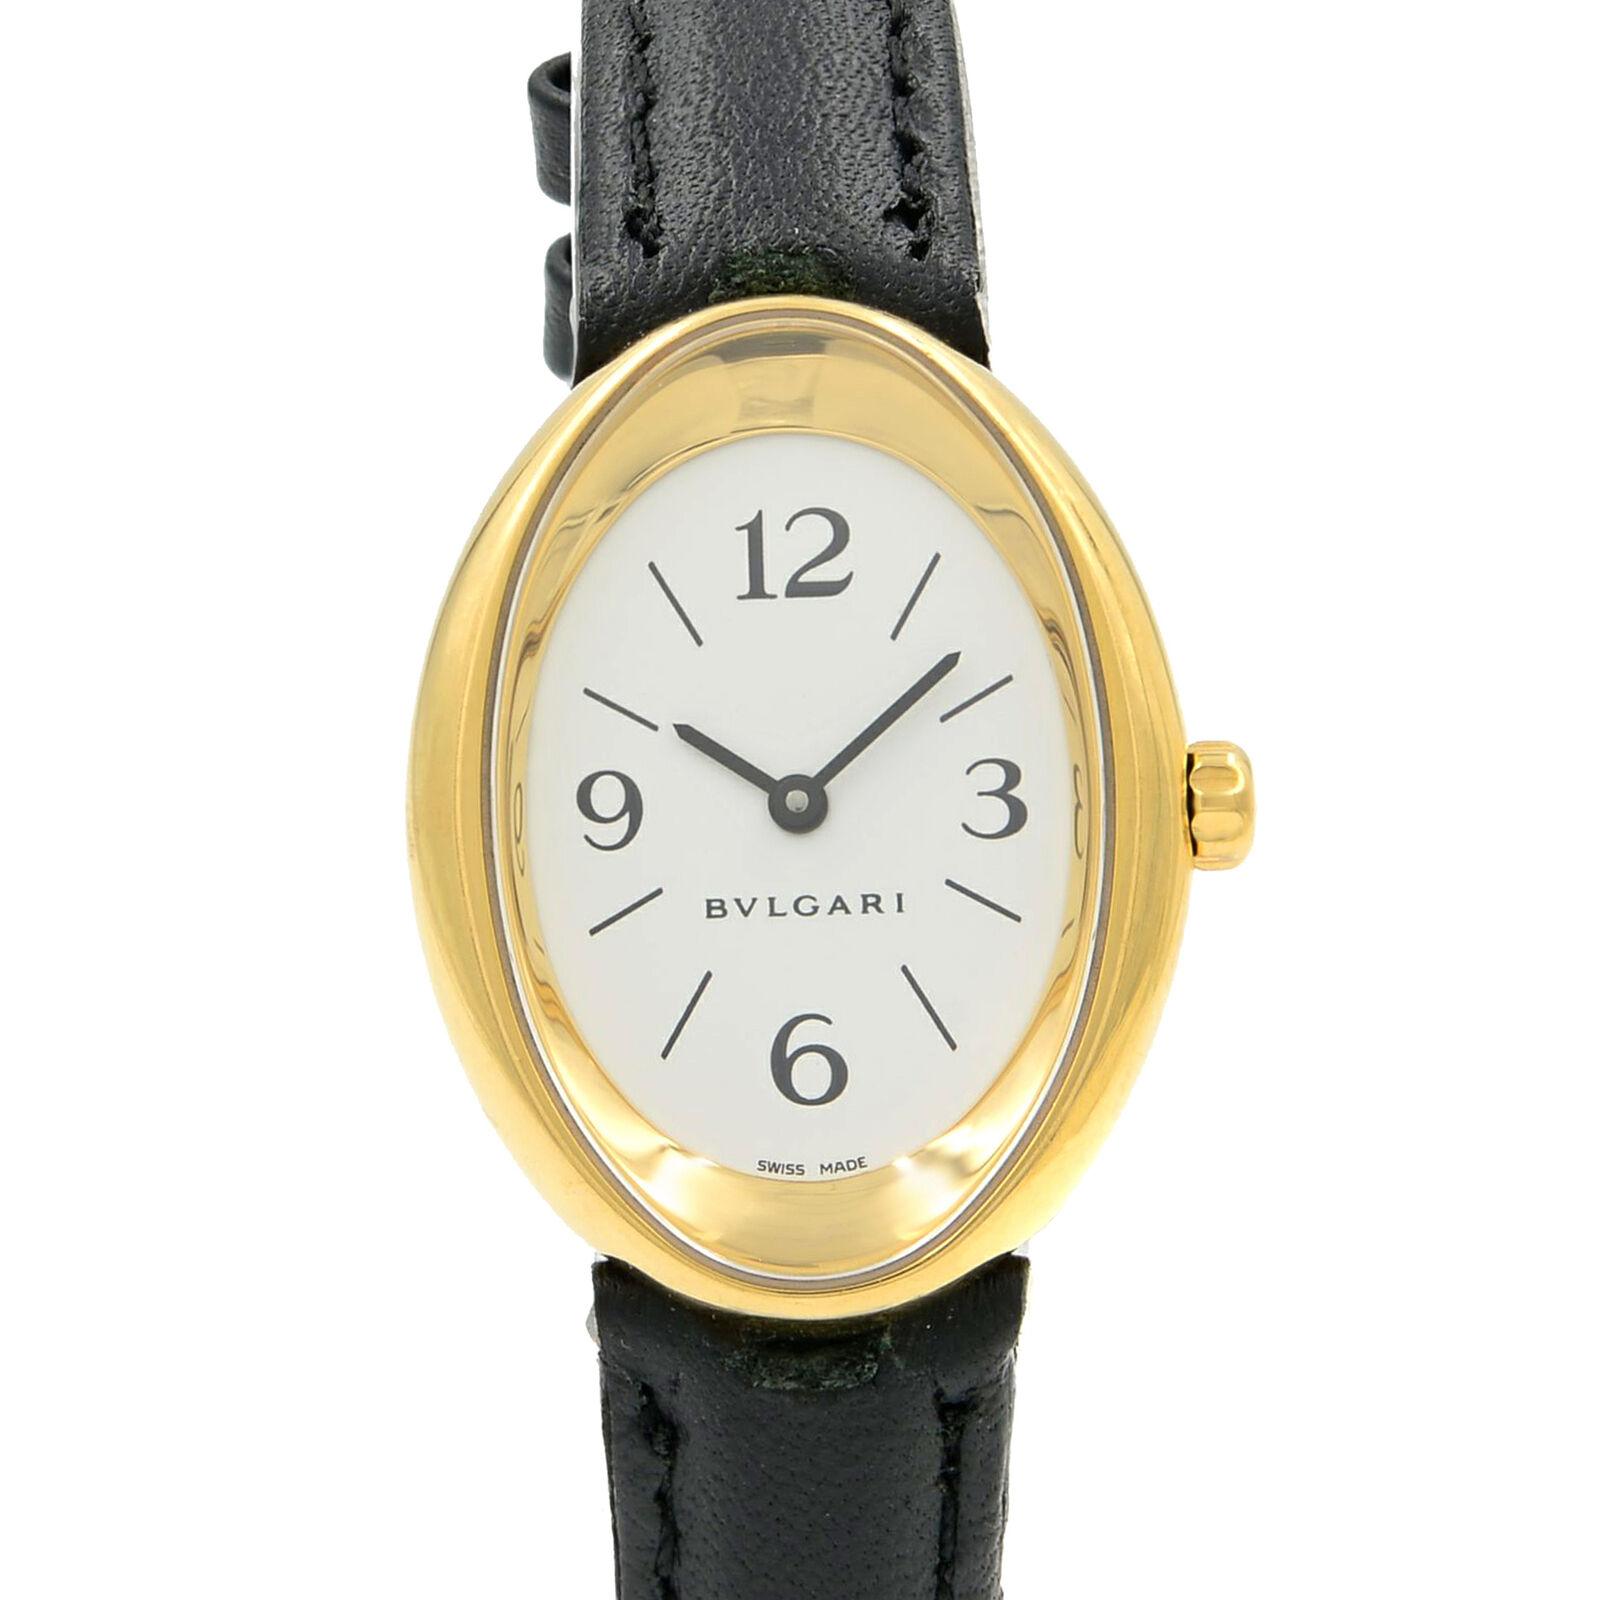 This pre-owned Bvlgari OV 32 G is a beautiful Ladies timepiece that is powered by a quartz movement which is cased in a yellow gold case. It has a round shape face, no features dial and has hand arabic numerals, sticks style markers. It is completed